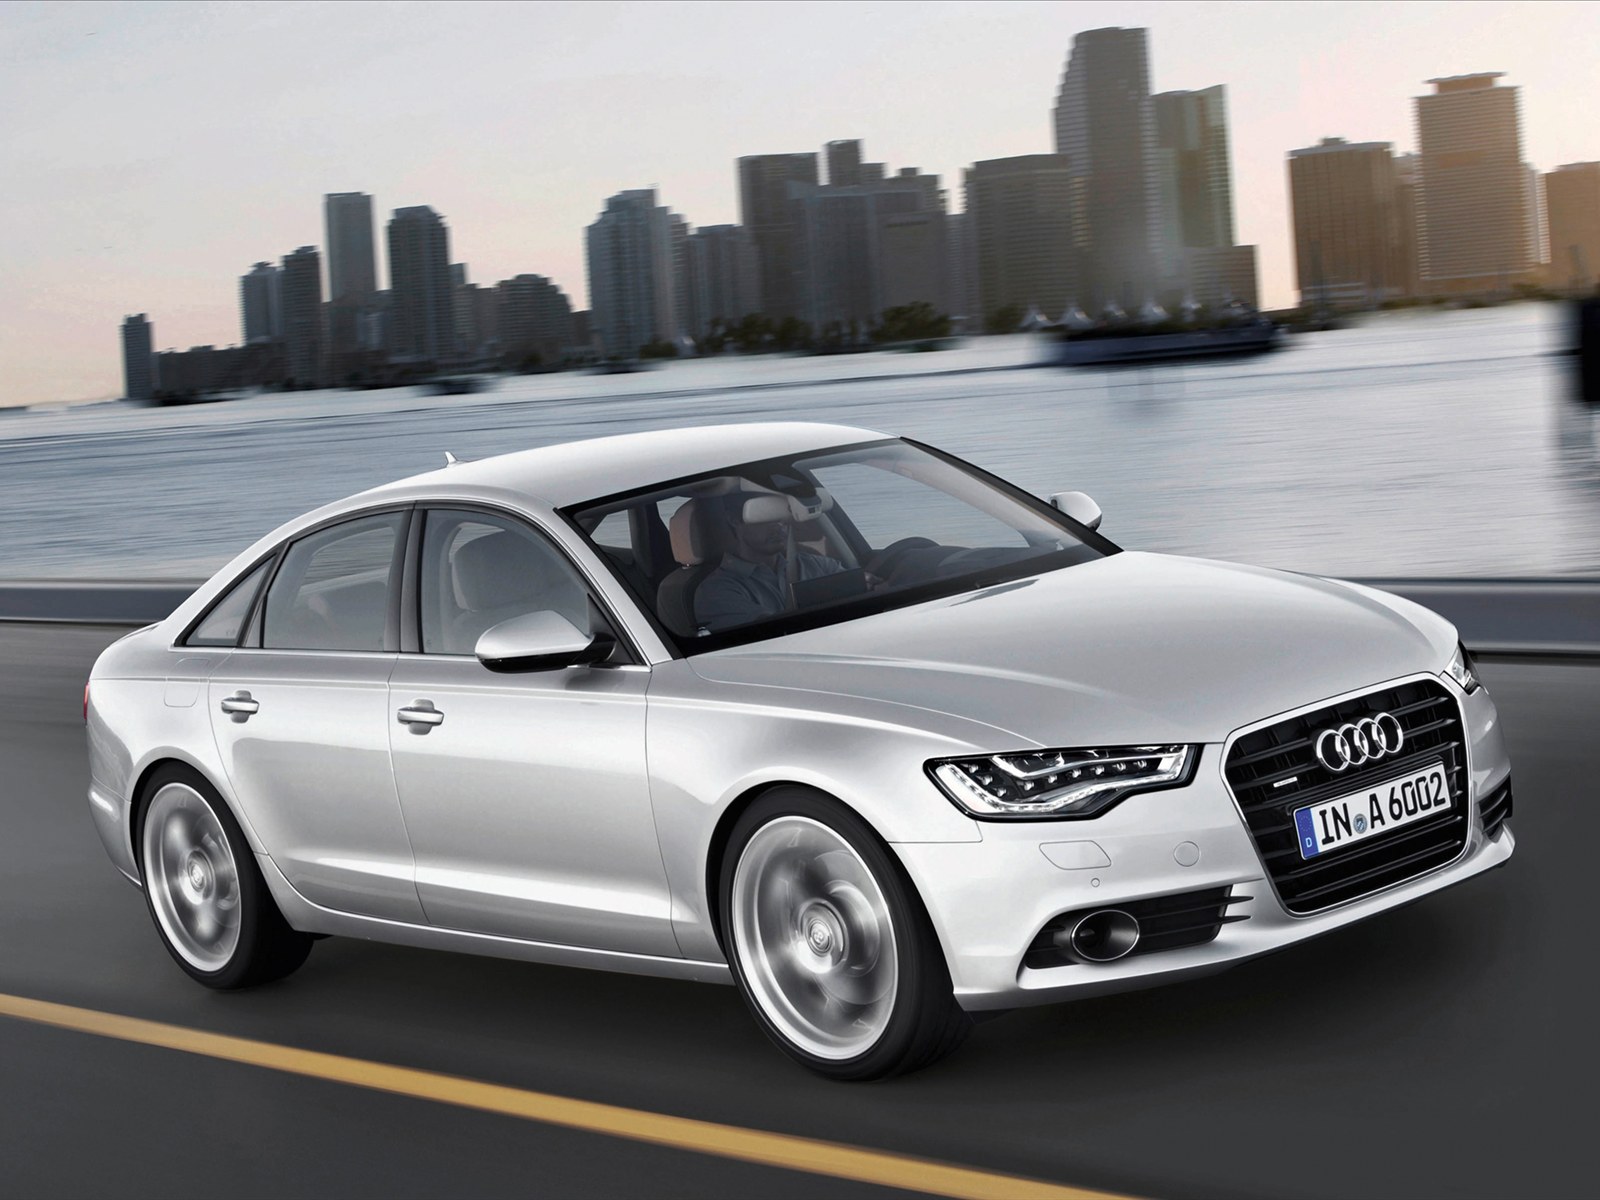 A3 Audi 2011 Hatchback - Without Compromising Luxury in Any Way #5